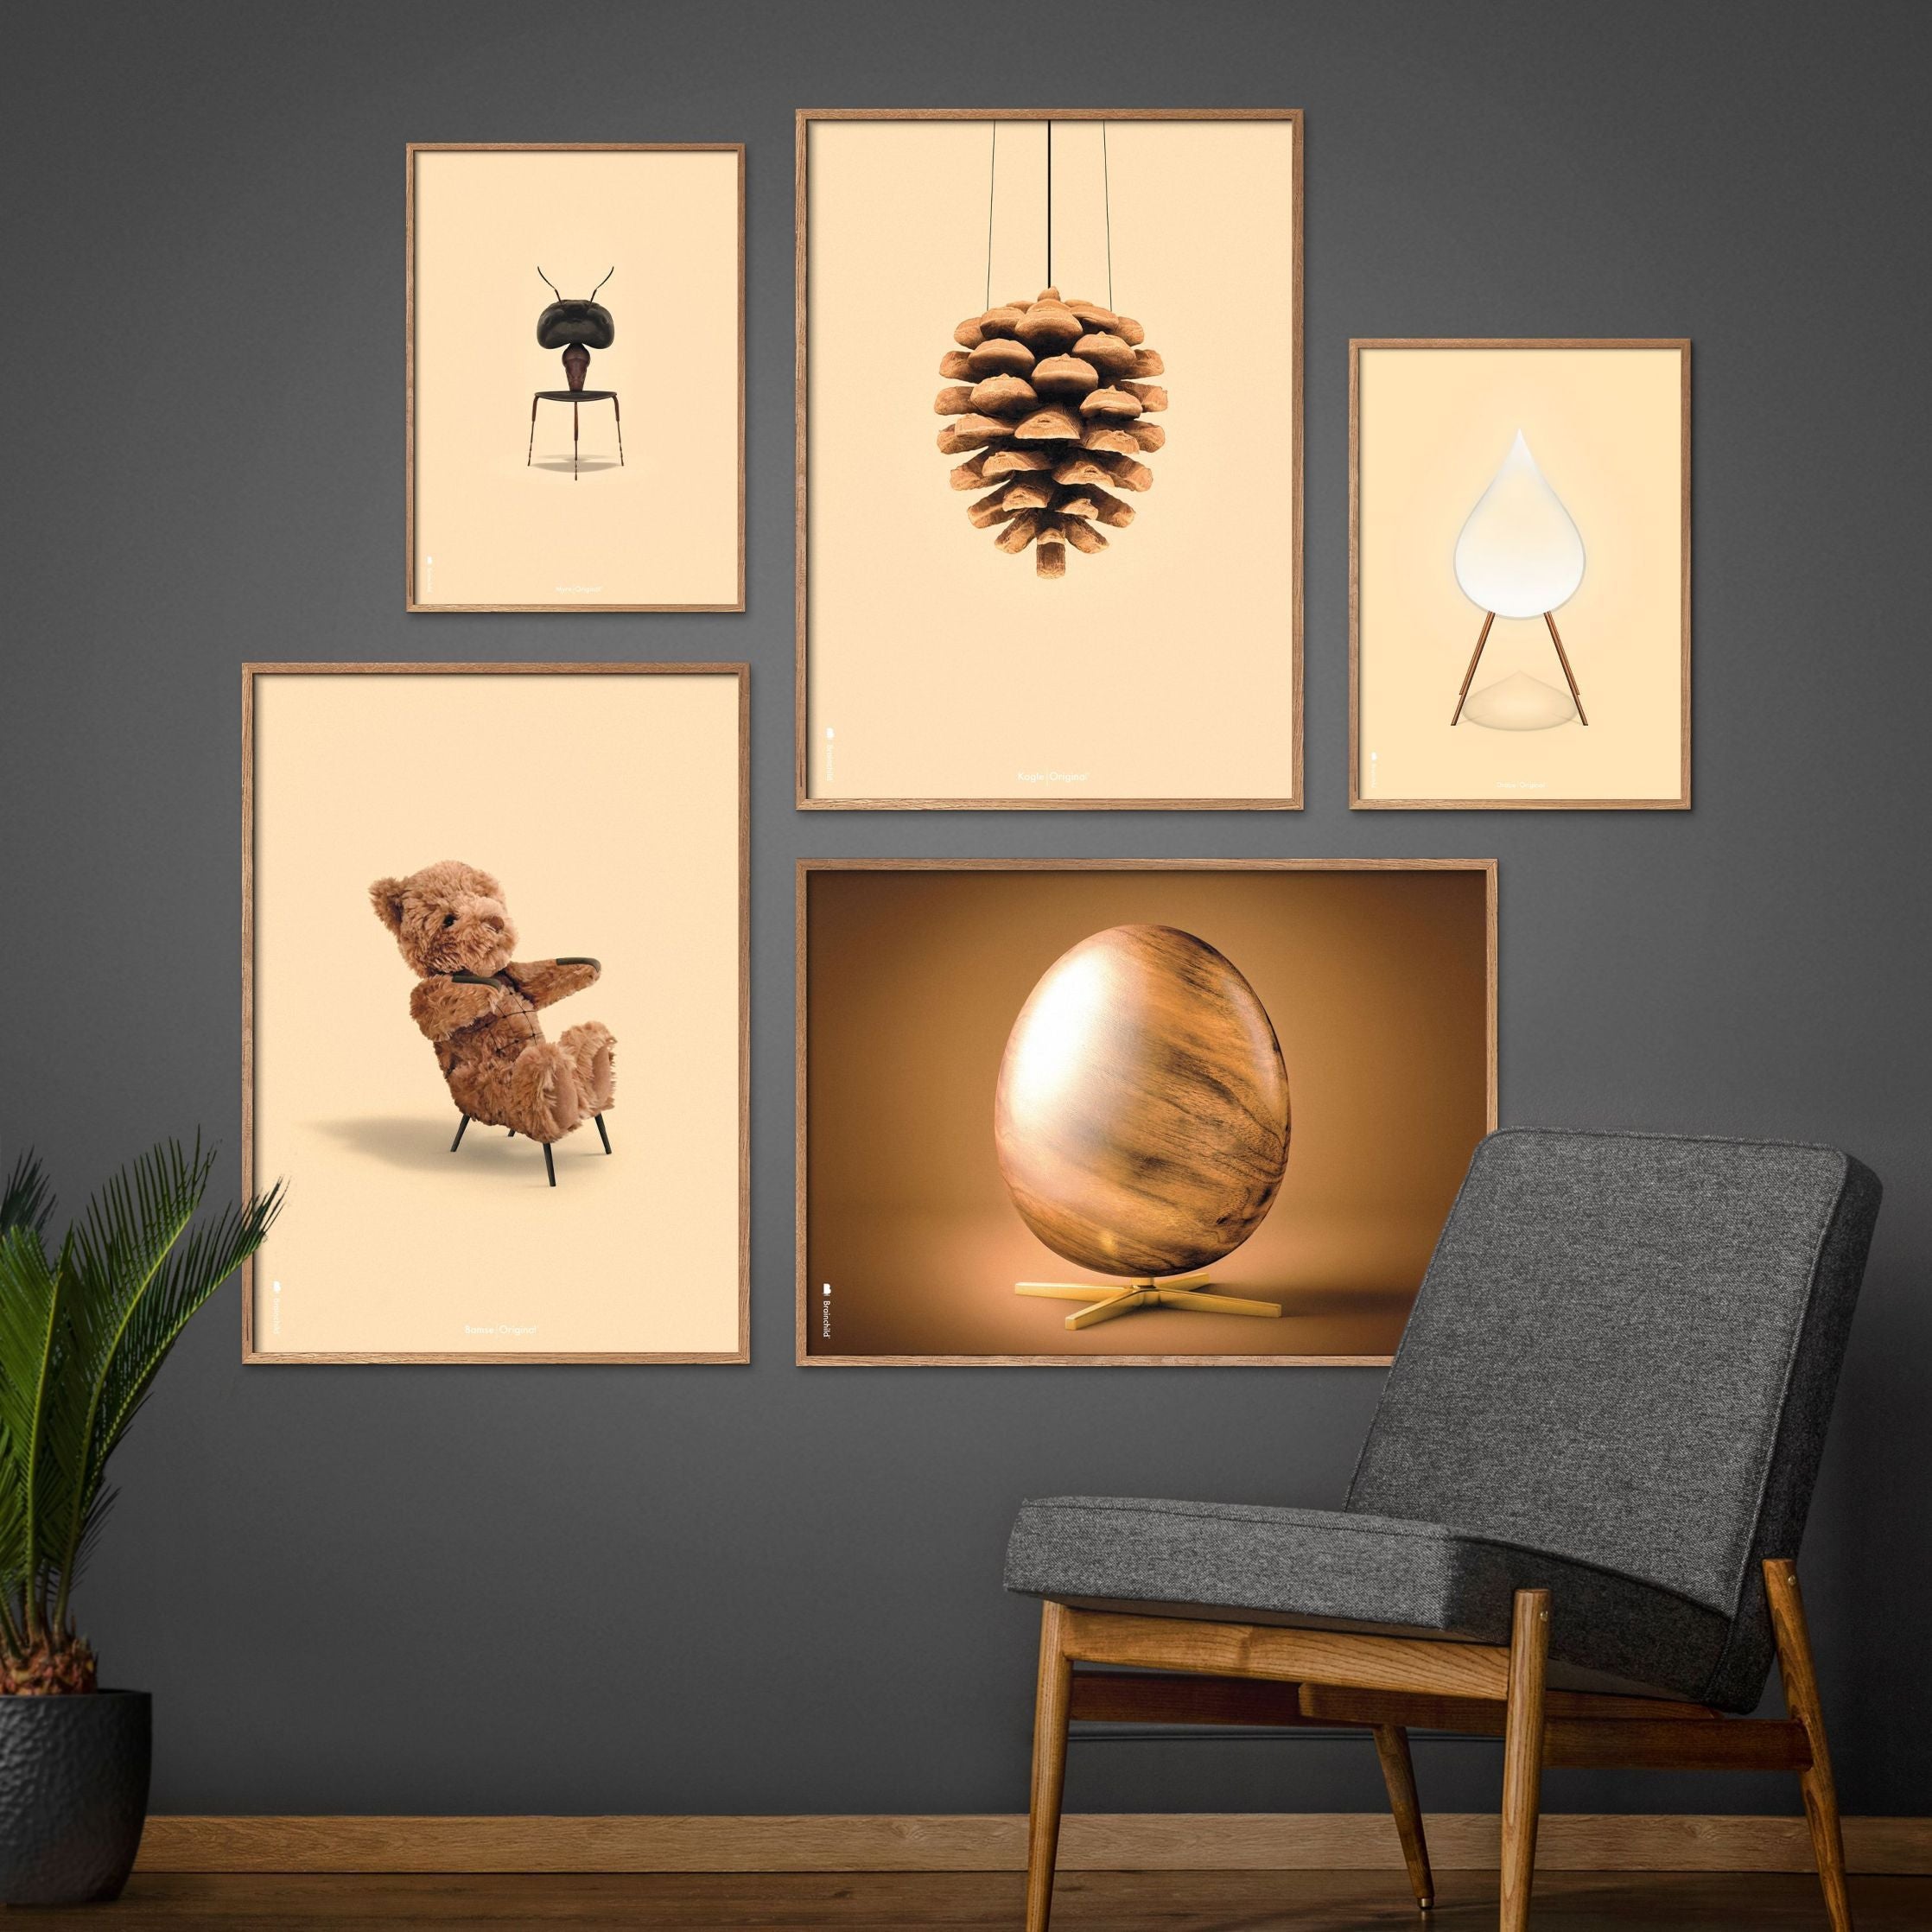 Brainchild Ant Classic Poster, Dark Wood Frame A5, Sand Colored Background